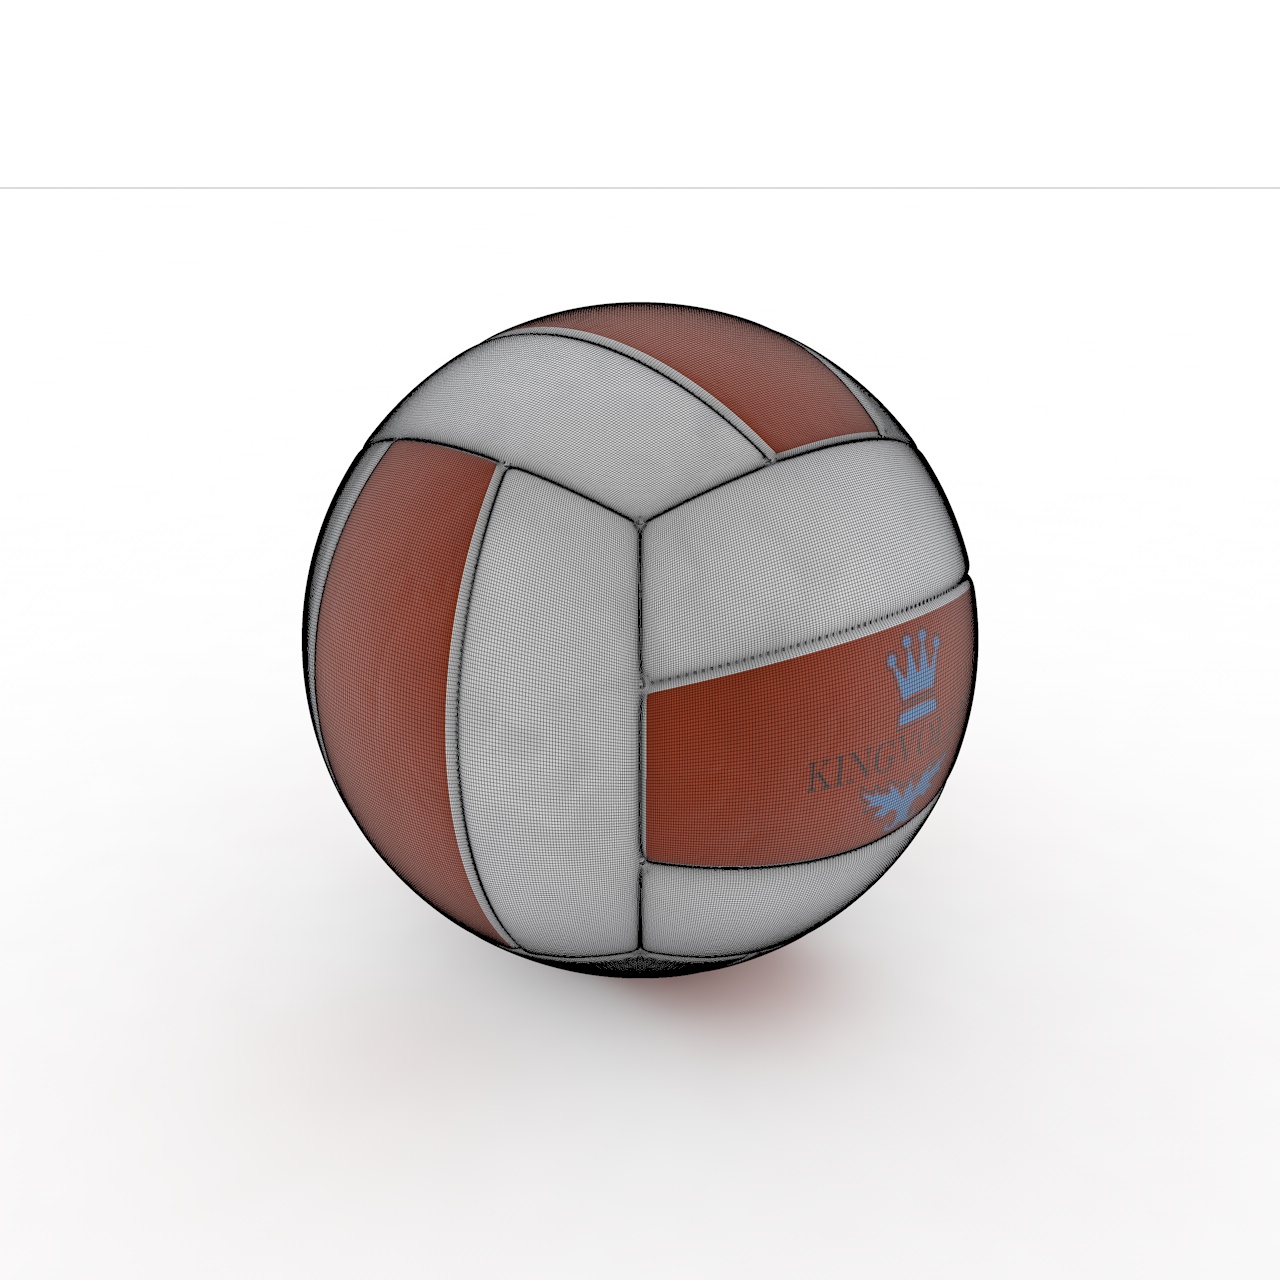 Volleyball 3d model